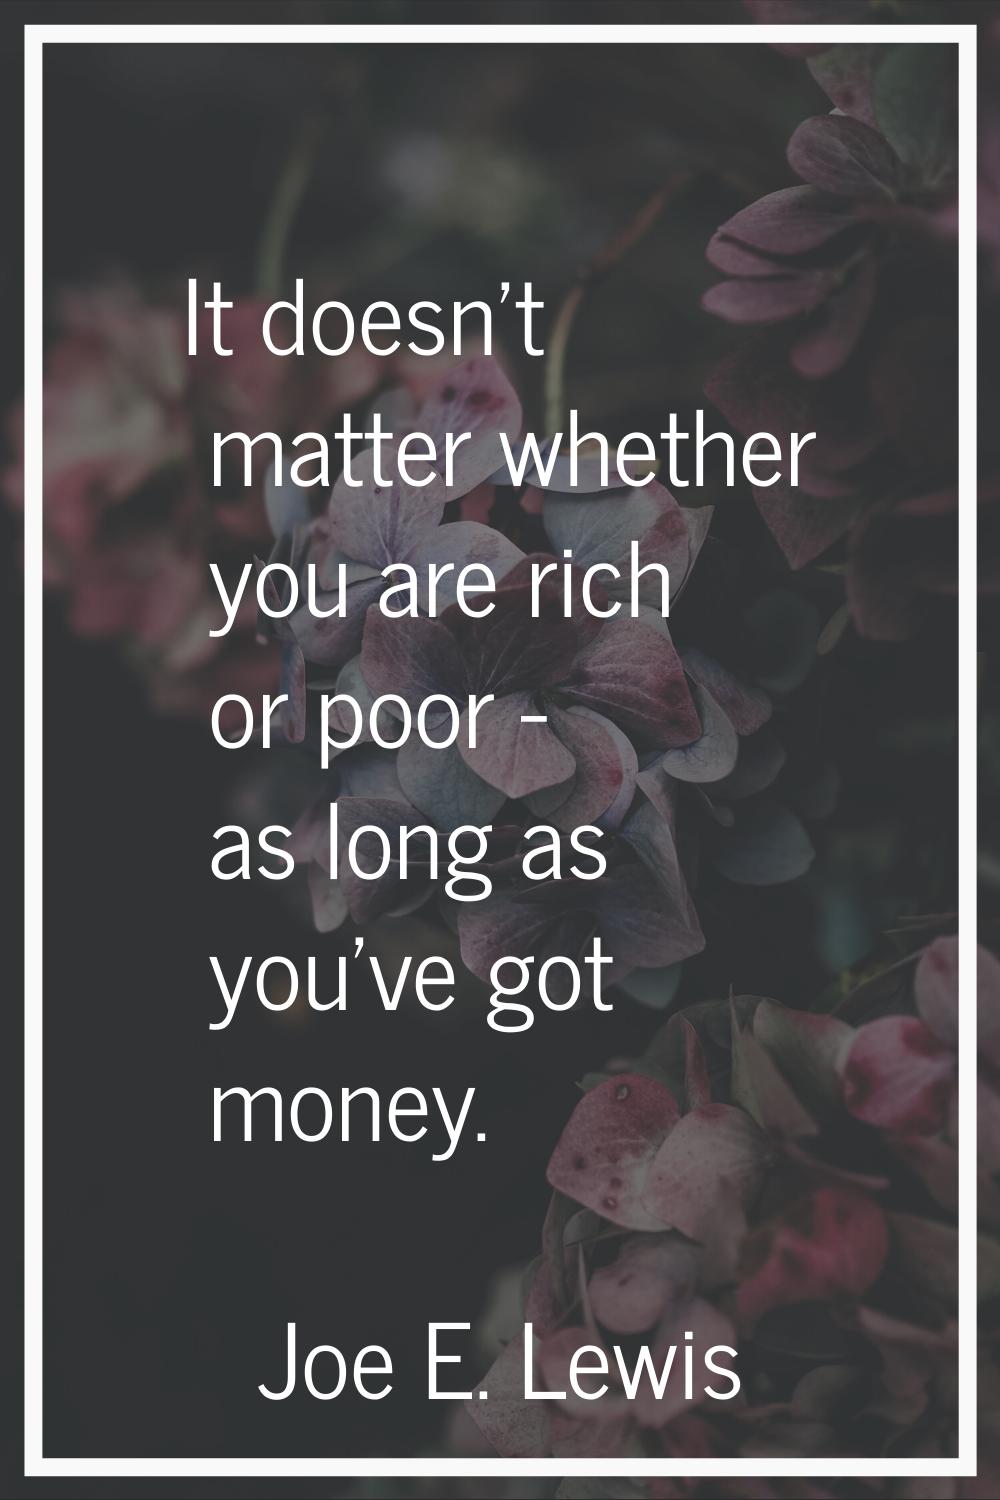 It doesn't matter whether you are rich or poor - as long as you've got money.